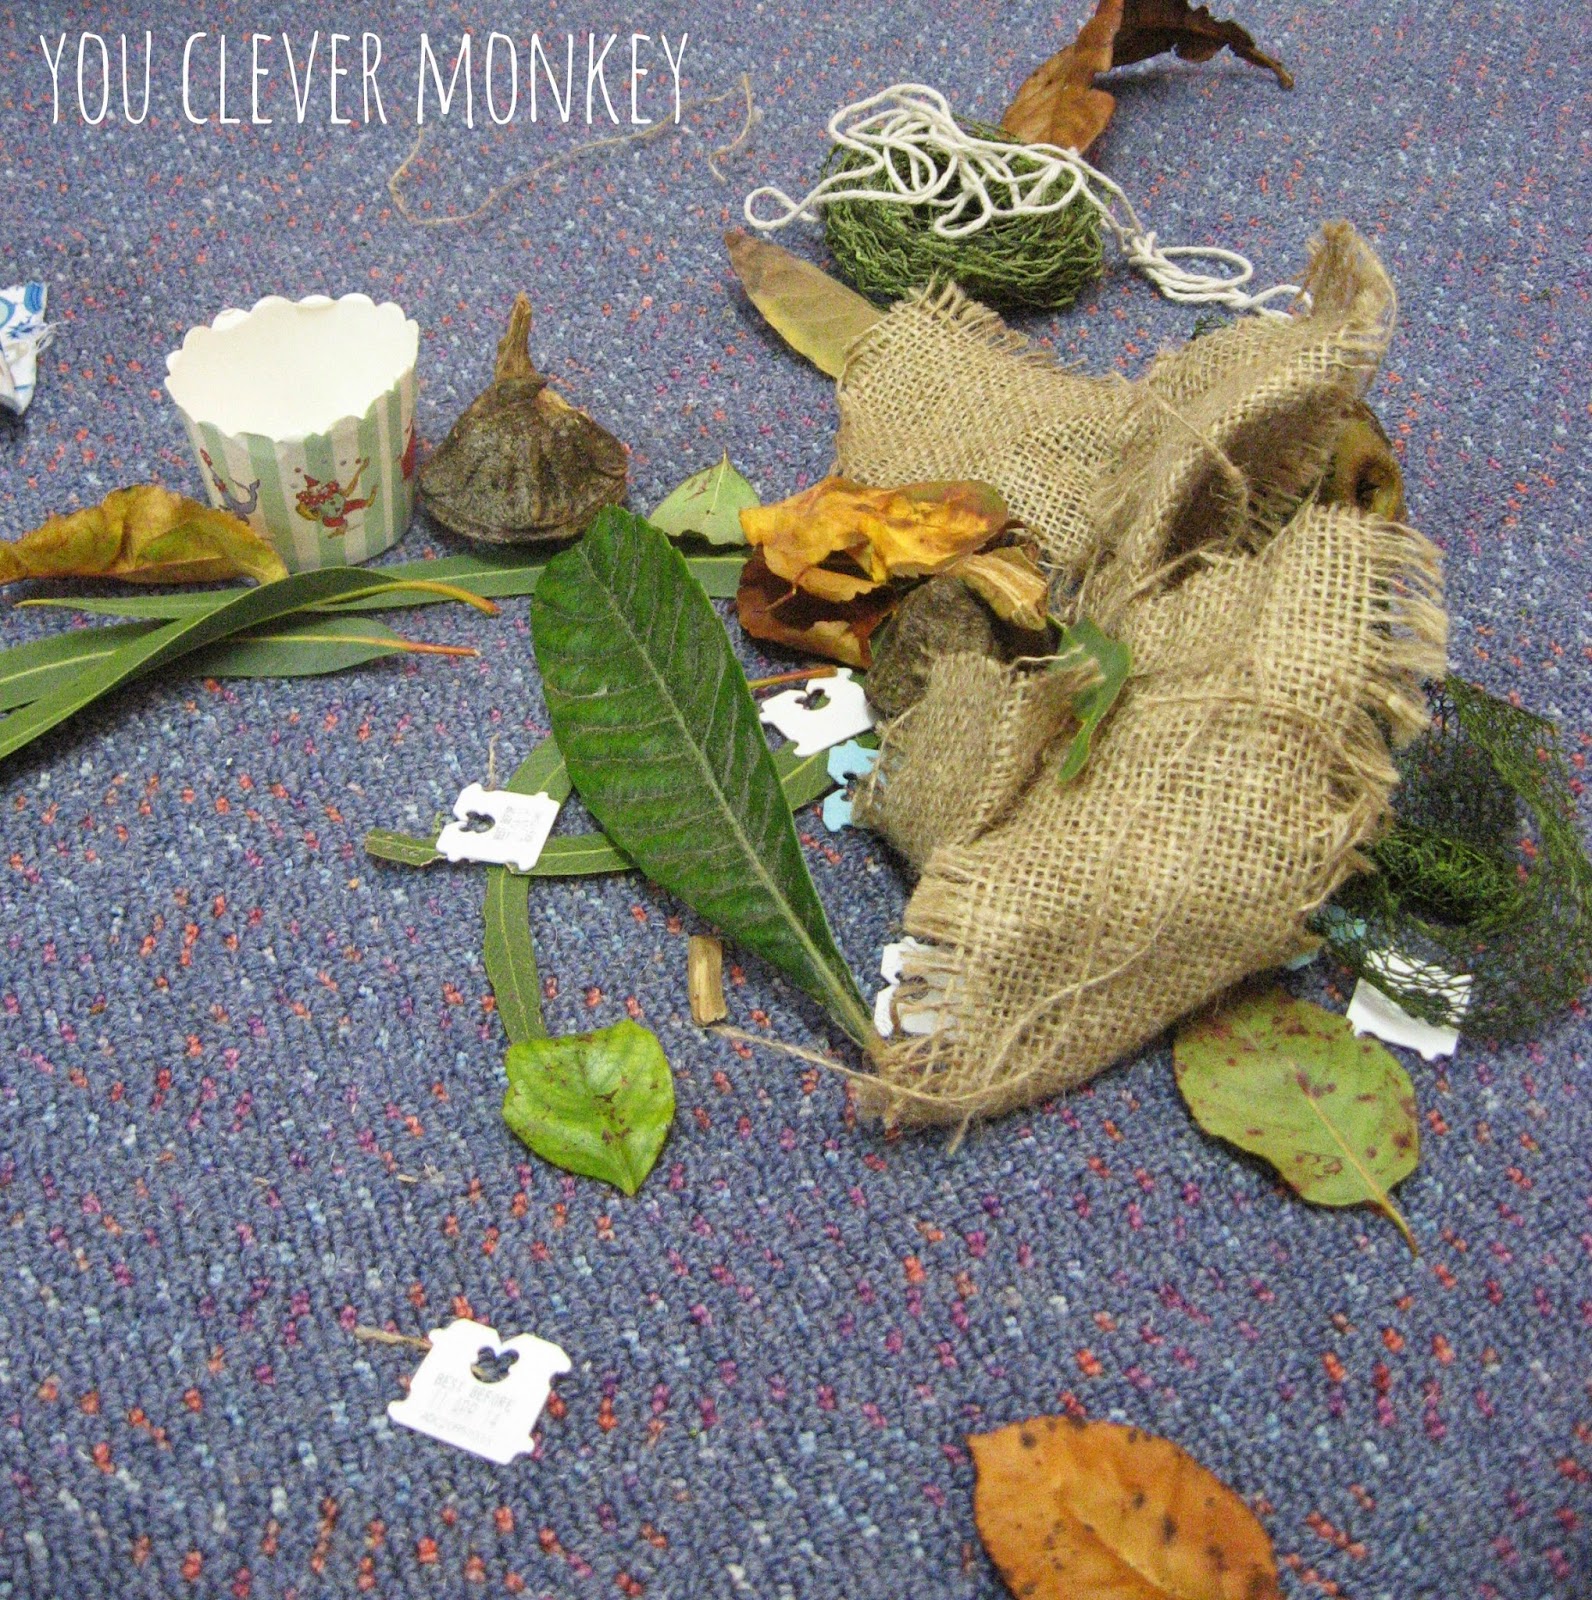 Beautiful stuff preschool project.  Find more information at http://youclevermonkey.com